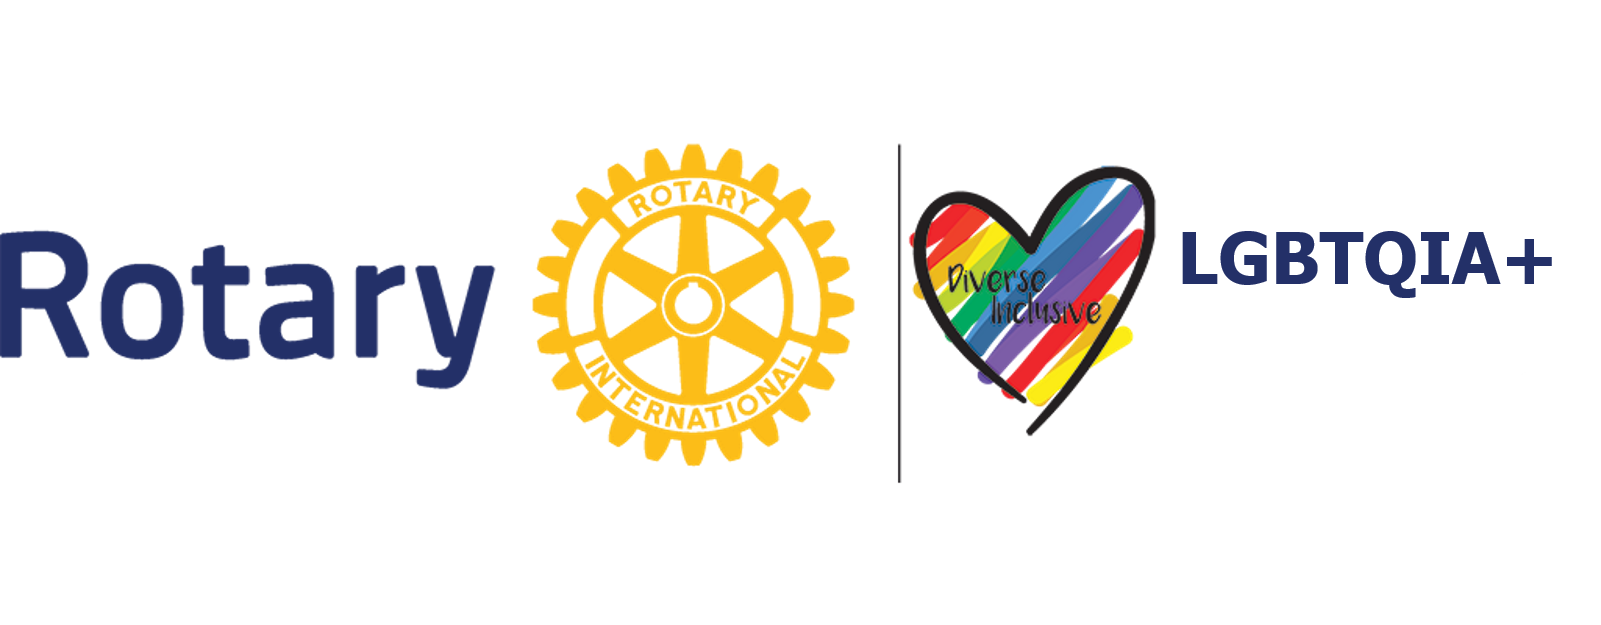 Register to walk in Calgary Pride Parade, Sun Sep 1 | Rotary District 5360